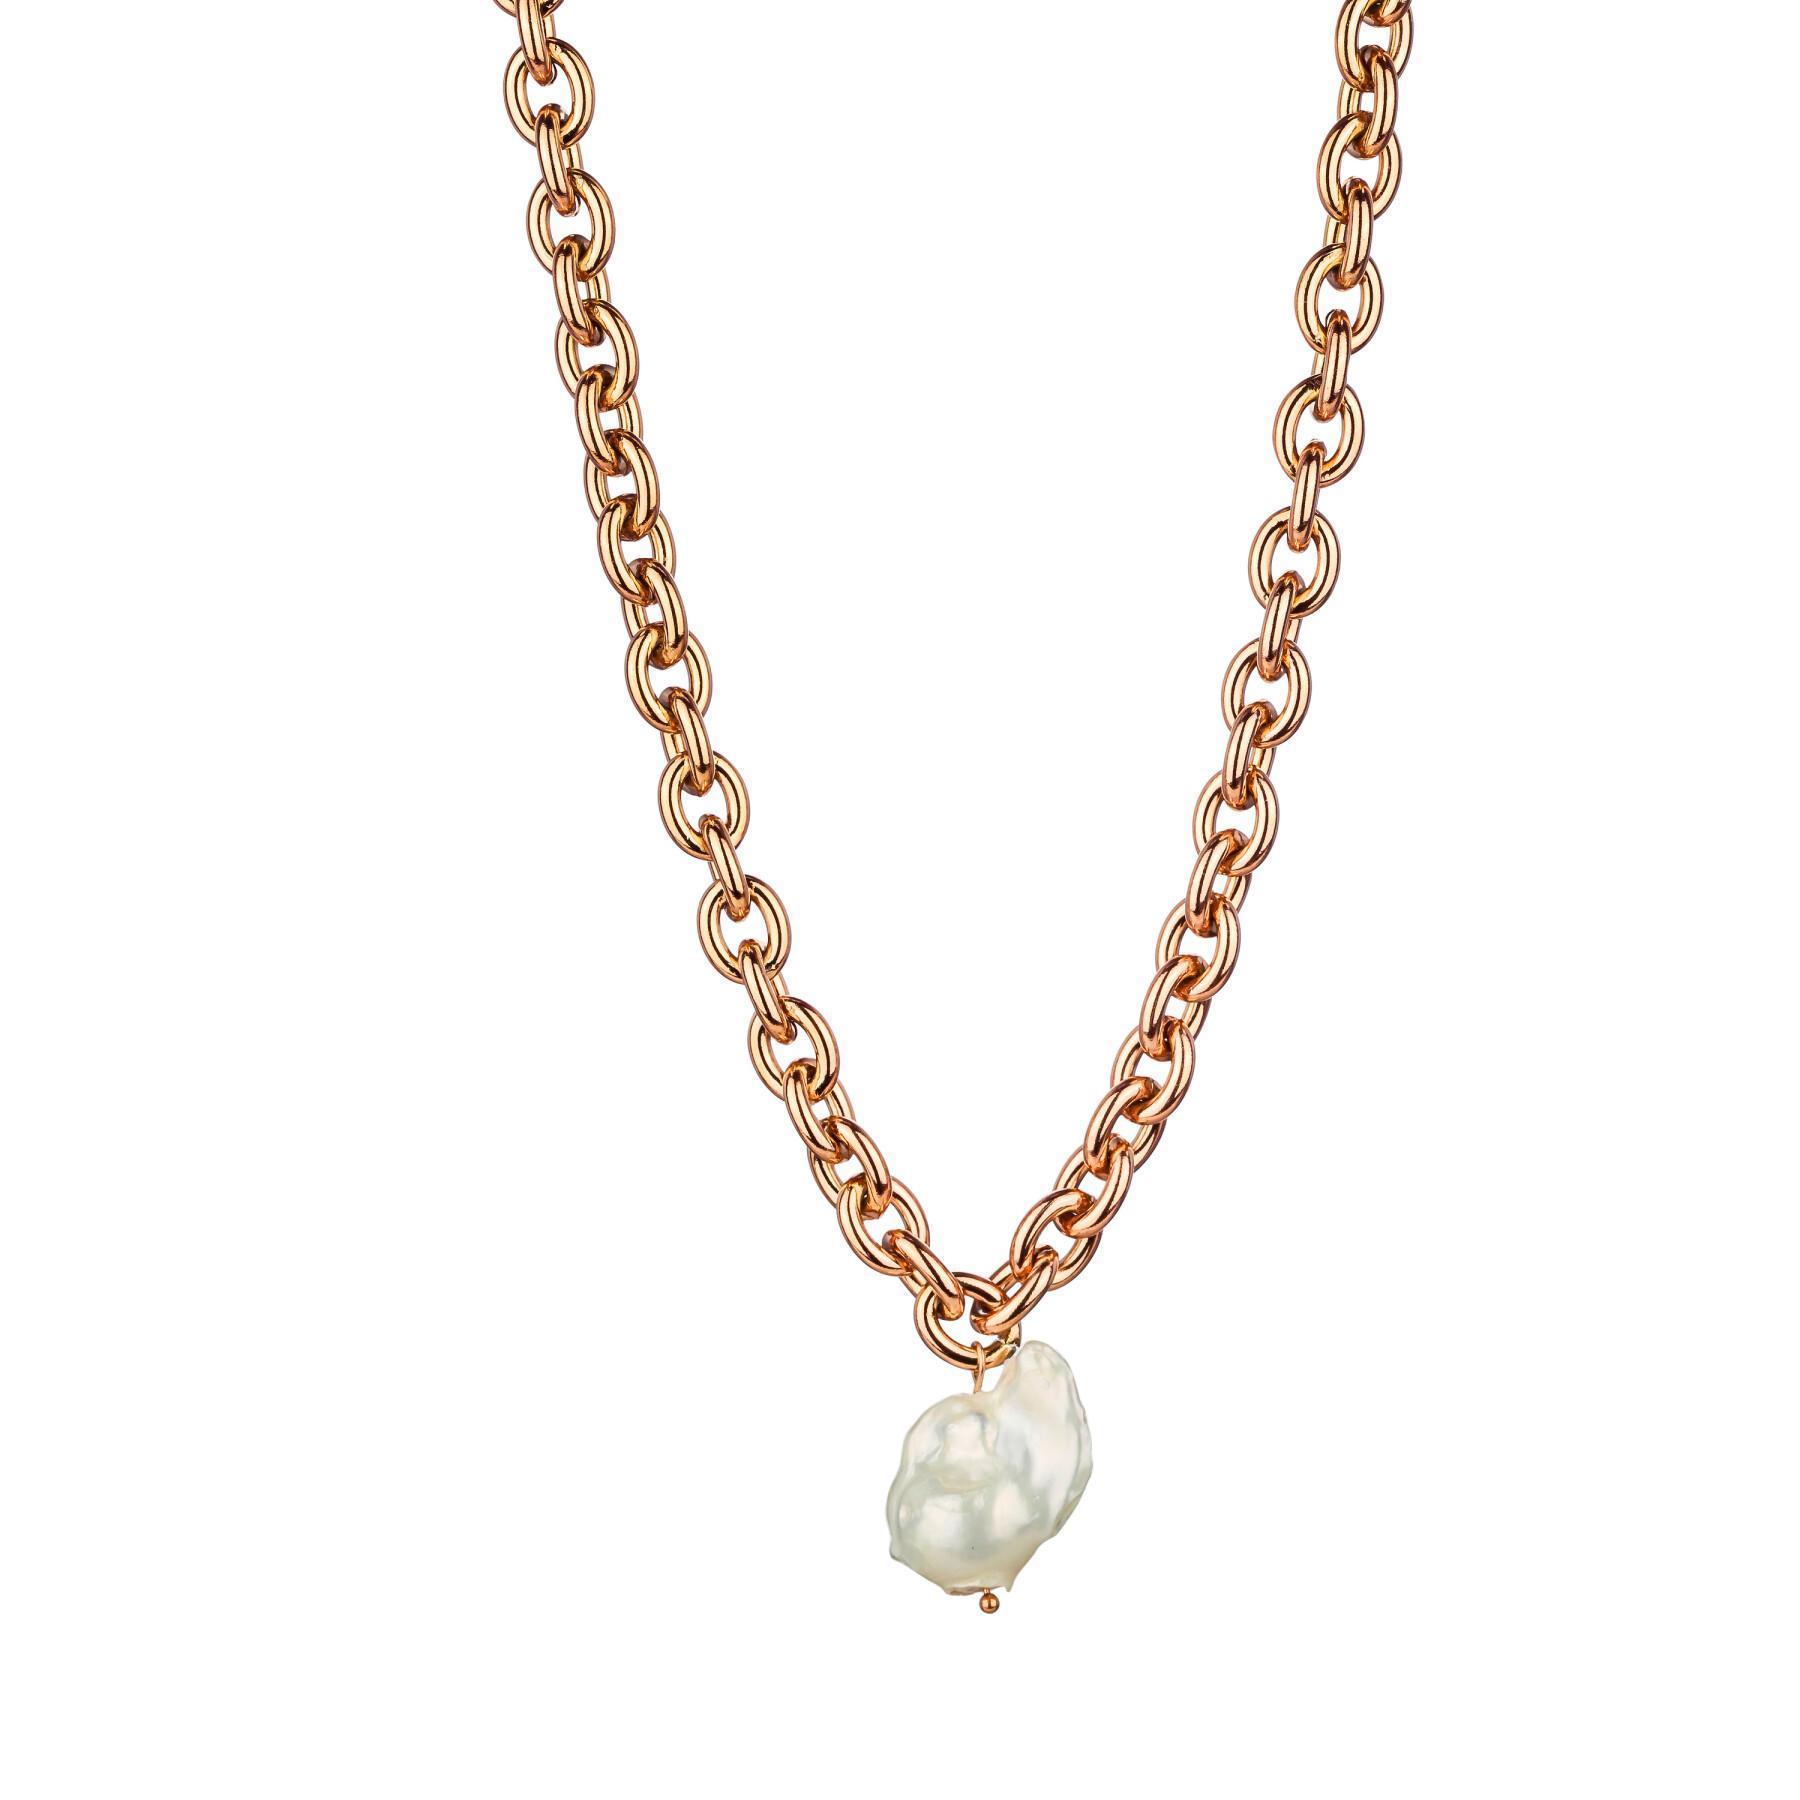 Women's necklace Isabella Ford Chloe White Pearl